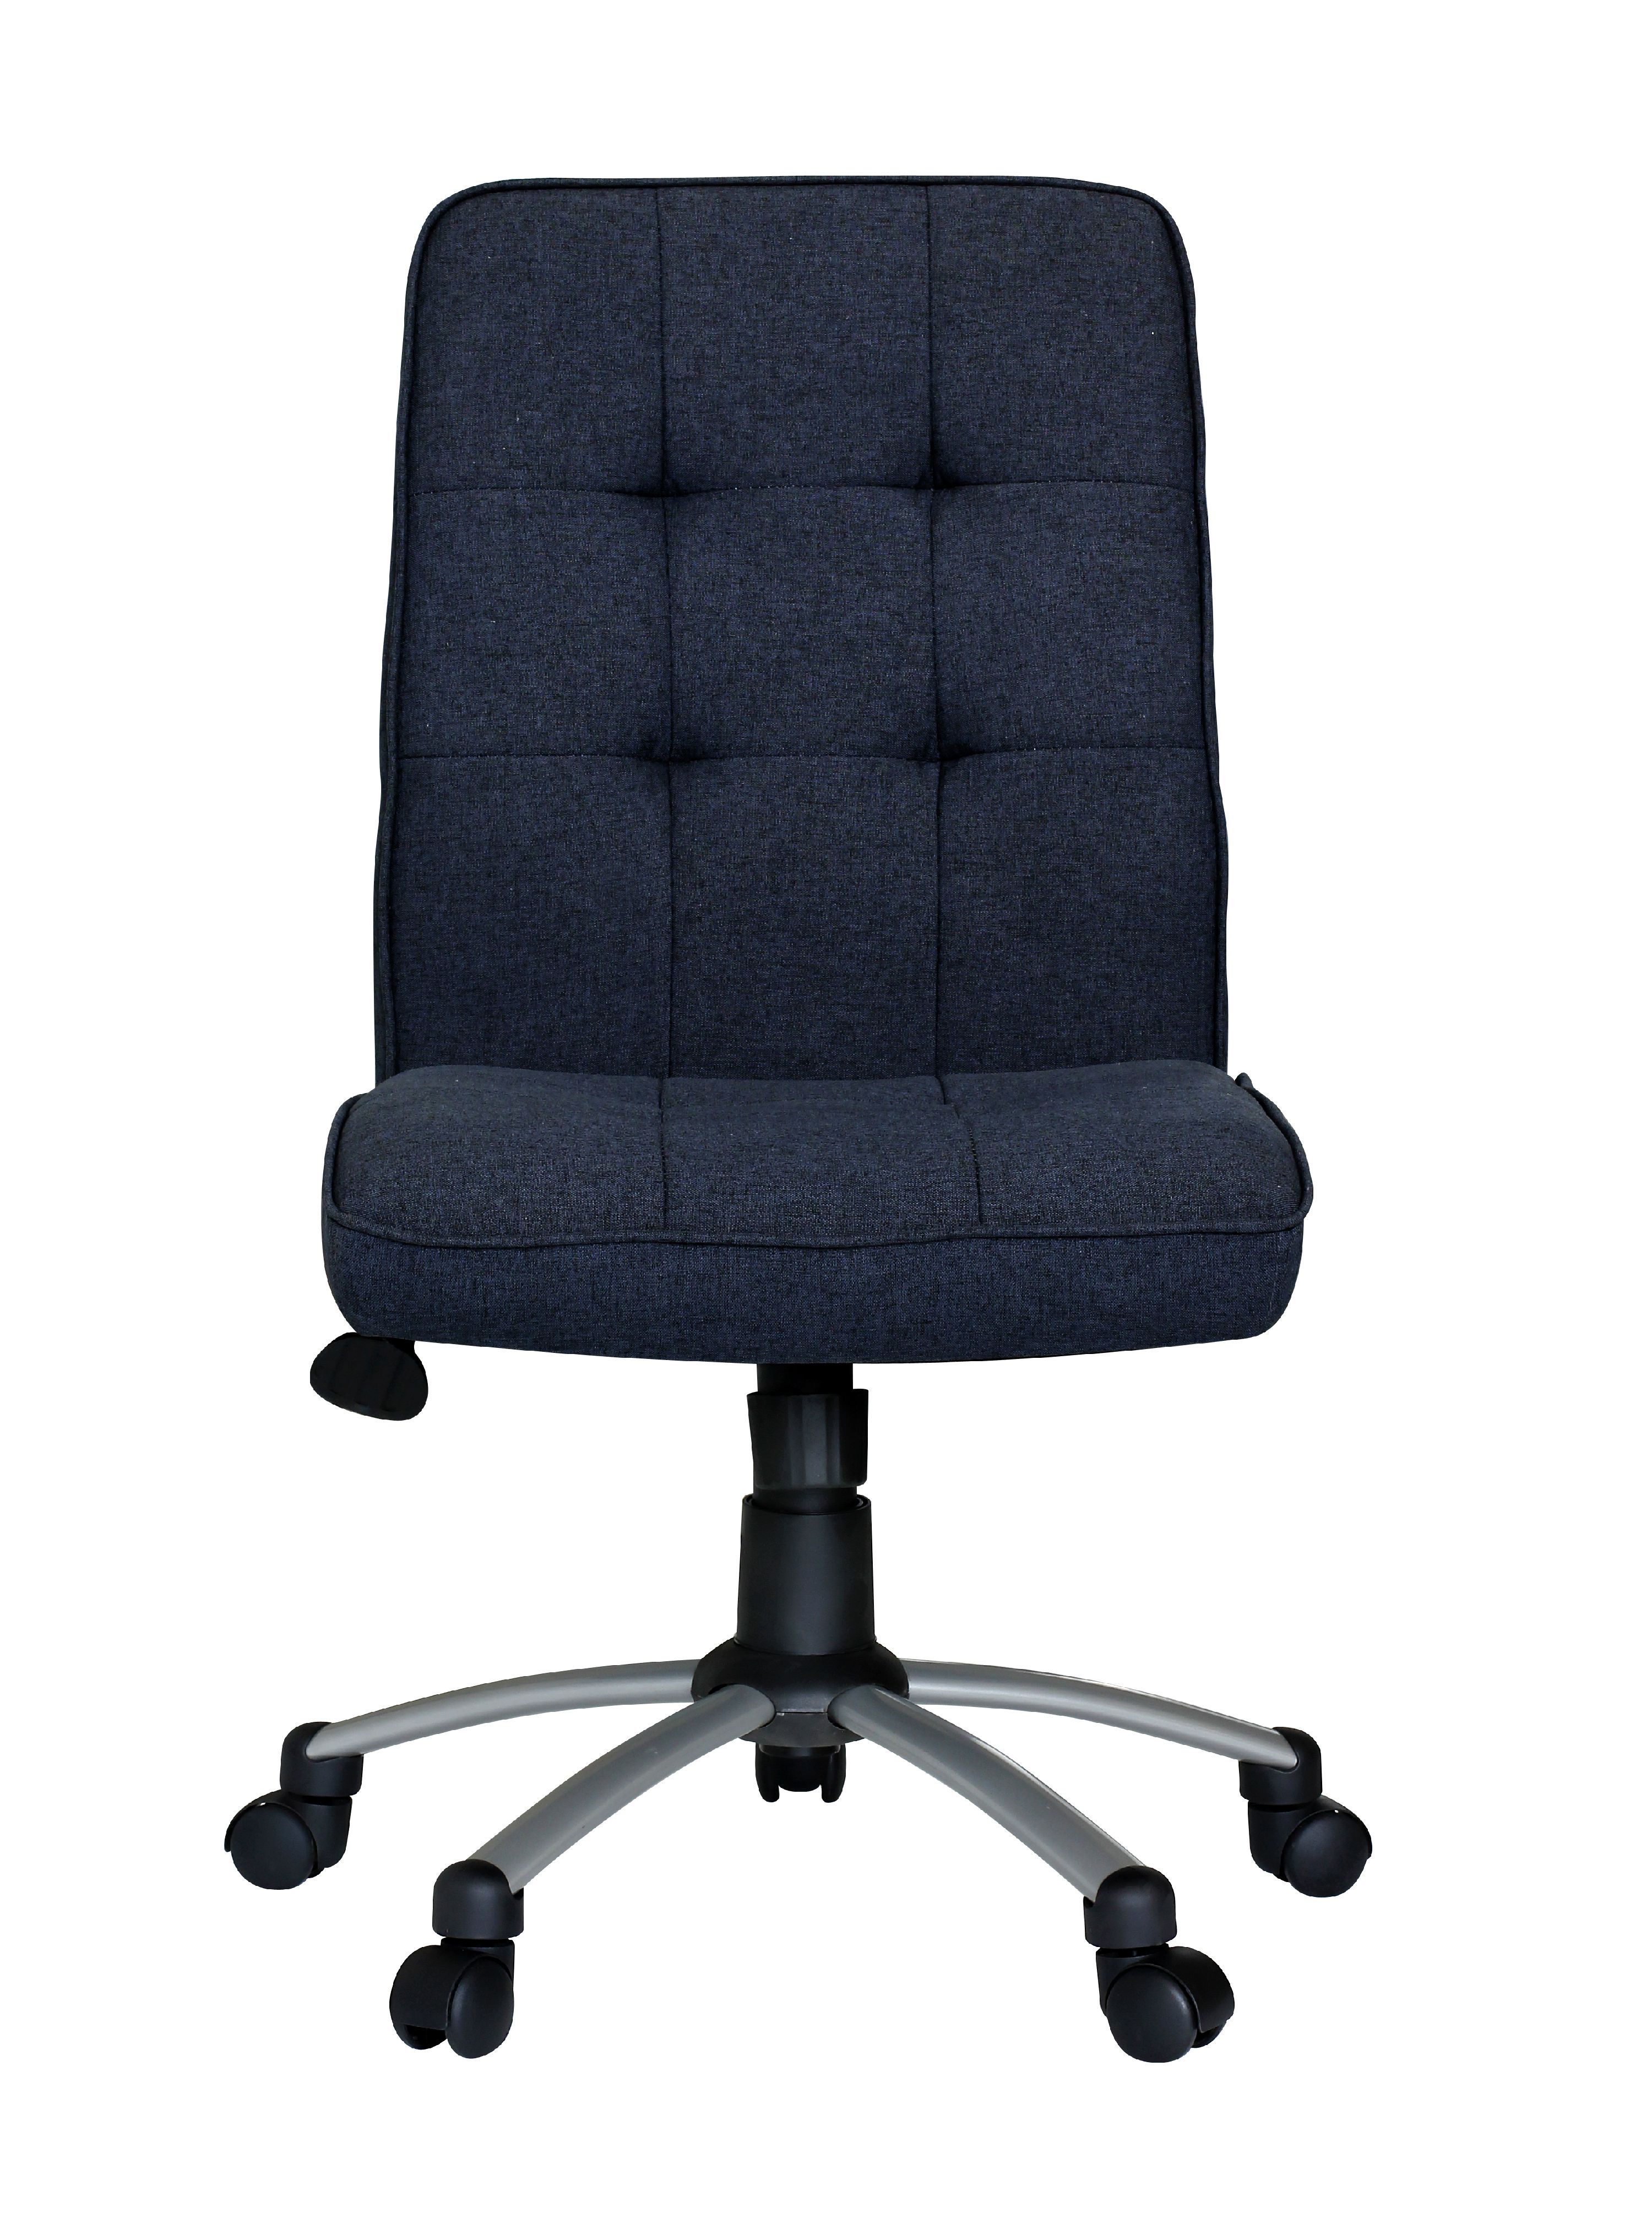 Boss Office & Home Donna Modern Mid-Back Armless Office Desk Chair, Multiple Colors - image 5 of 8